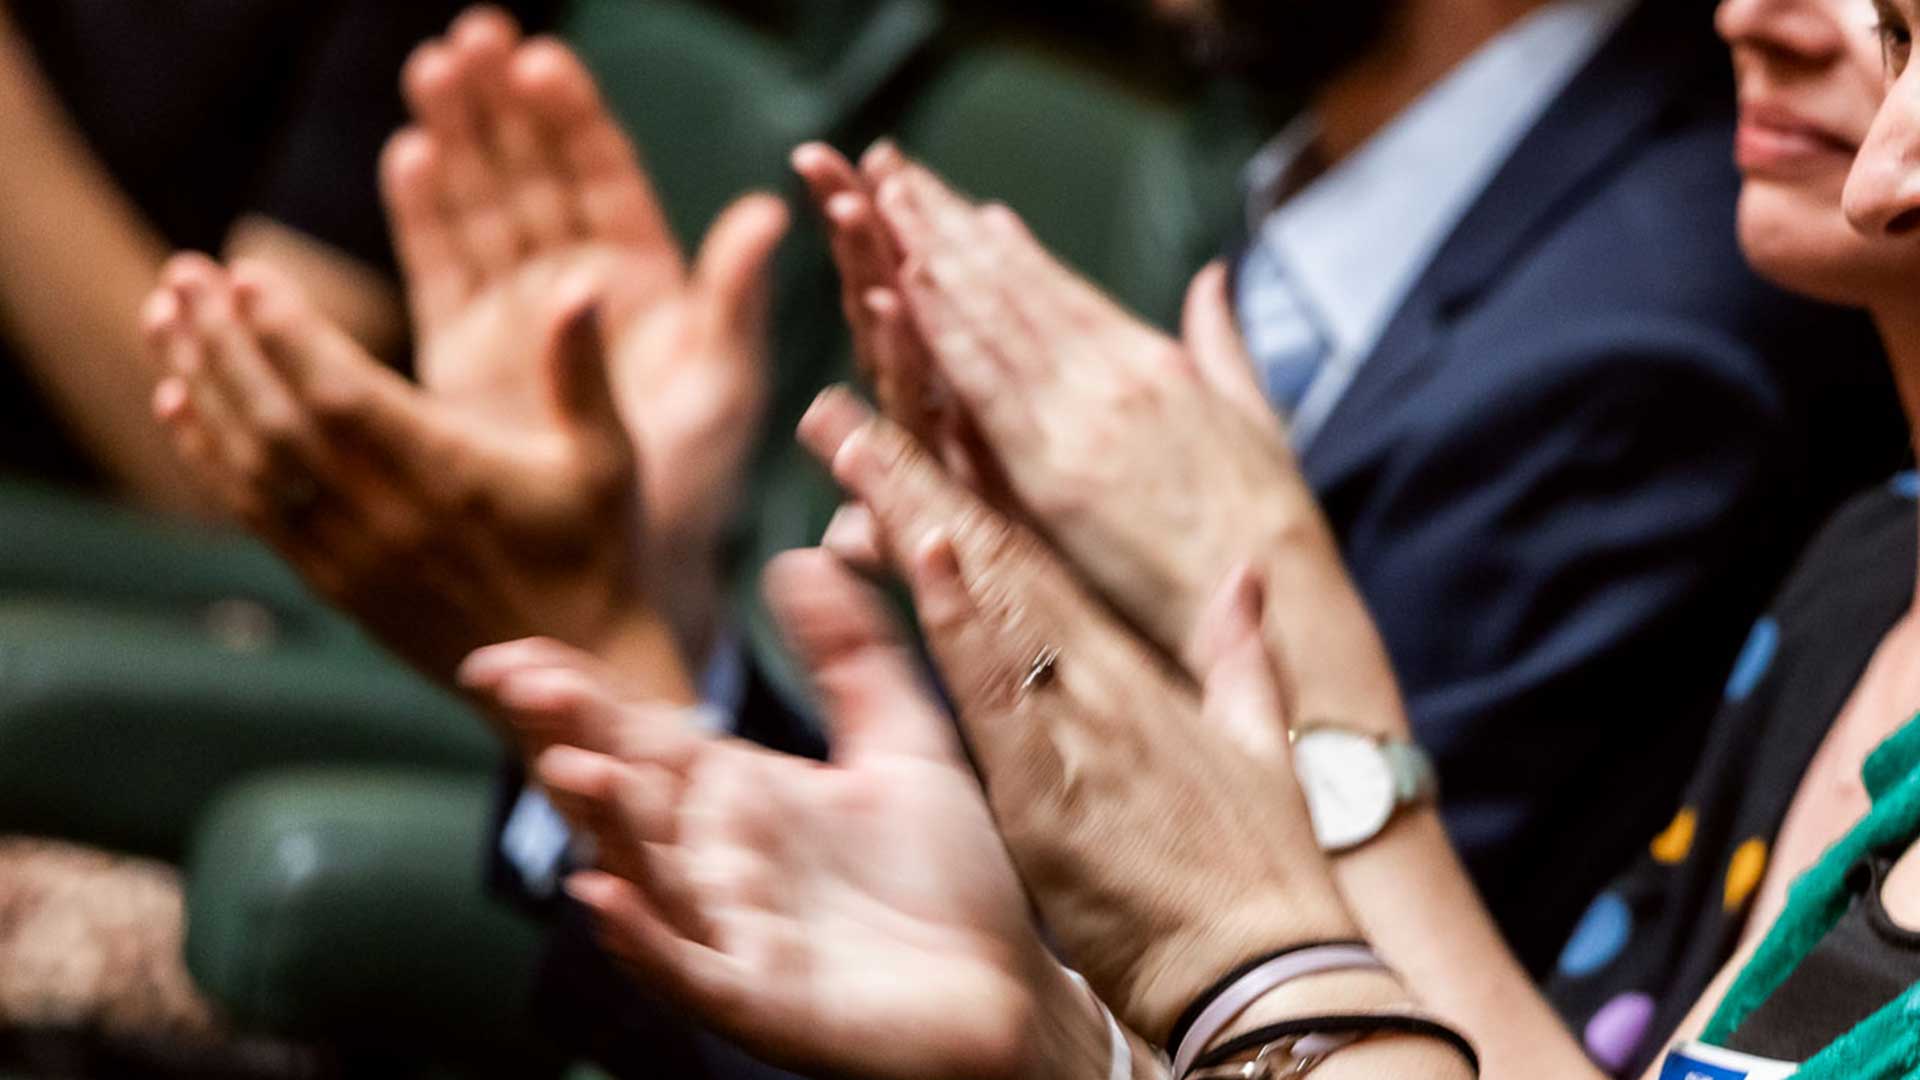 Close up photo of hands clapping